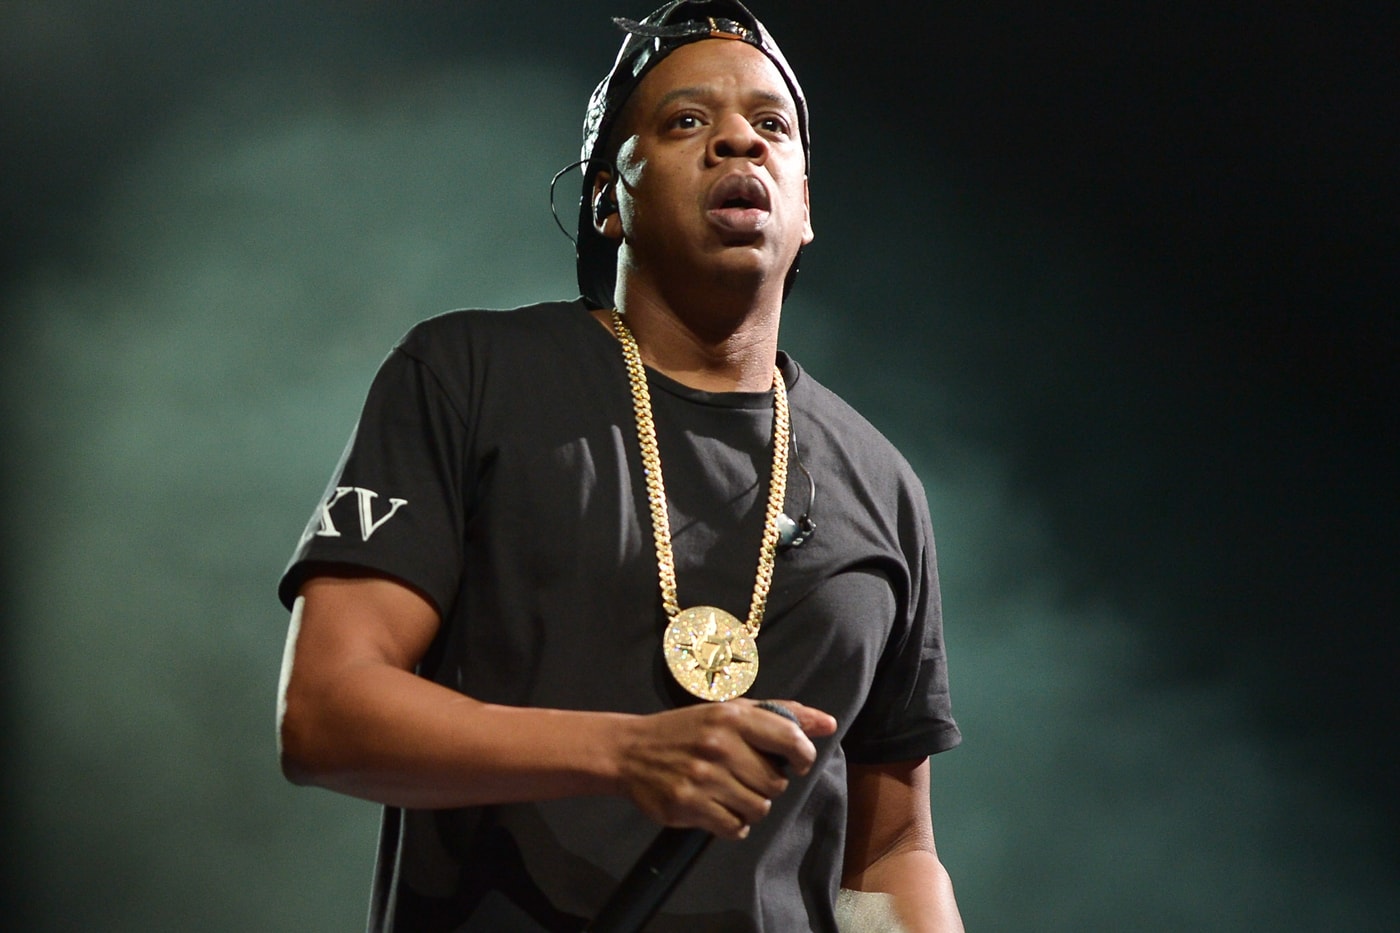 jay-z-urged-kevin-durant-to-meet-with-knicks-nets-but-he-declined